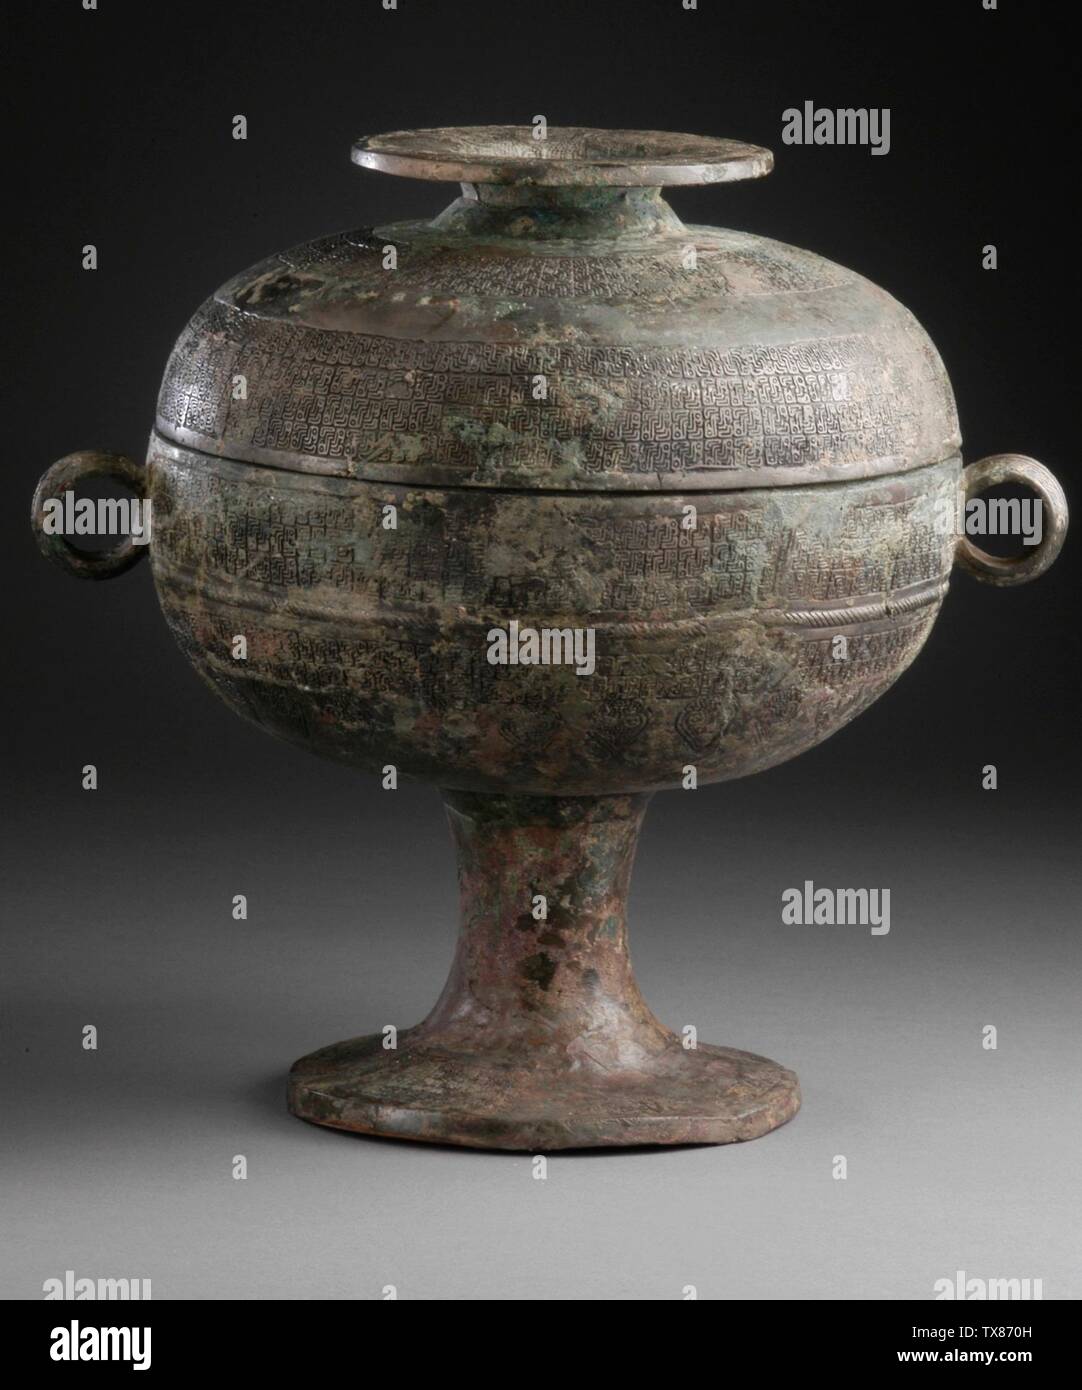 Lidded Tureen (Dou) with Interlaced Dragons;  China, Early Eastern Zhou dynasty, Spring and Autumn period, 771-481 B.C. Furnishings; Serviceware Cast bronze Gift of Mr. and Mrs. Eric Lidow (AC1998.251.19a-b) Chinese Art; 771-481 B.C.; Stock Photo